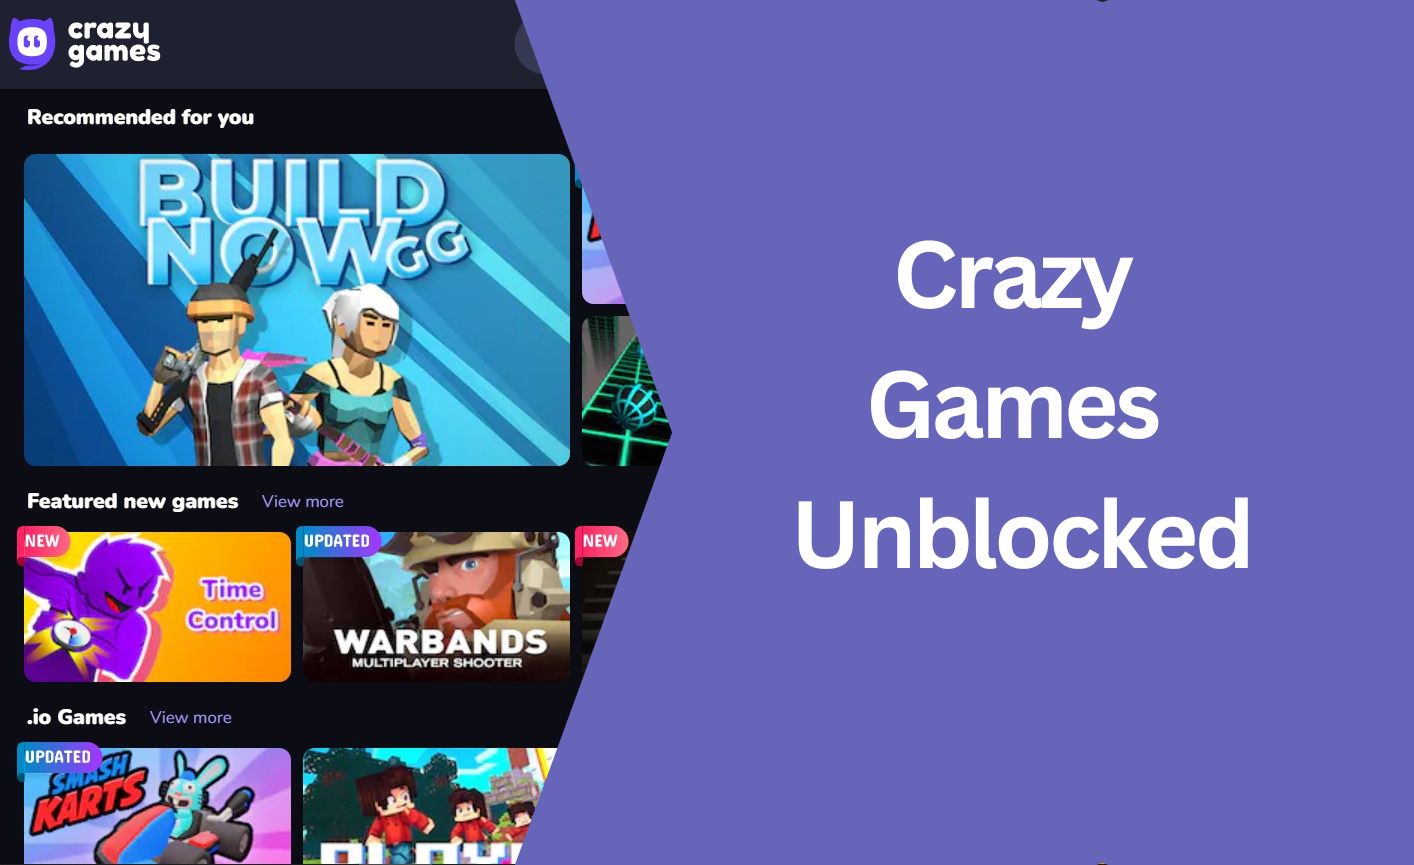 130 Best Unblocked Games 16 - Fun and Play with Friends Online